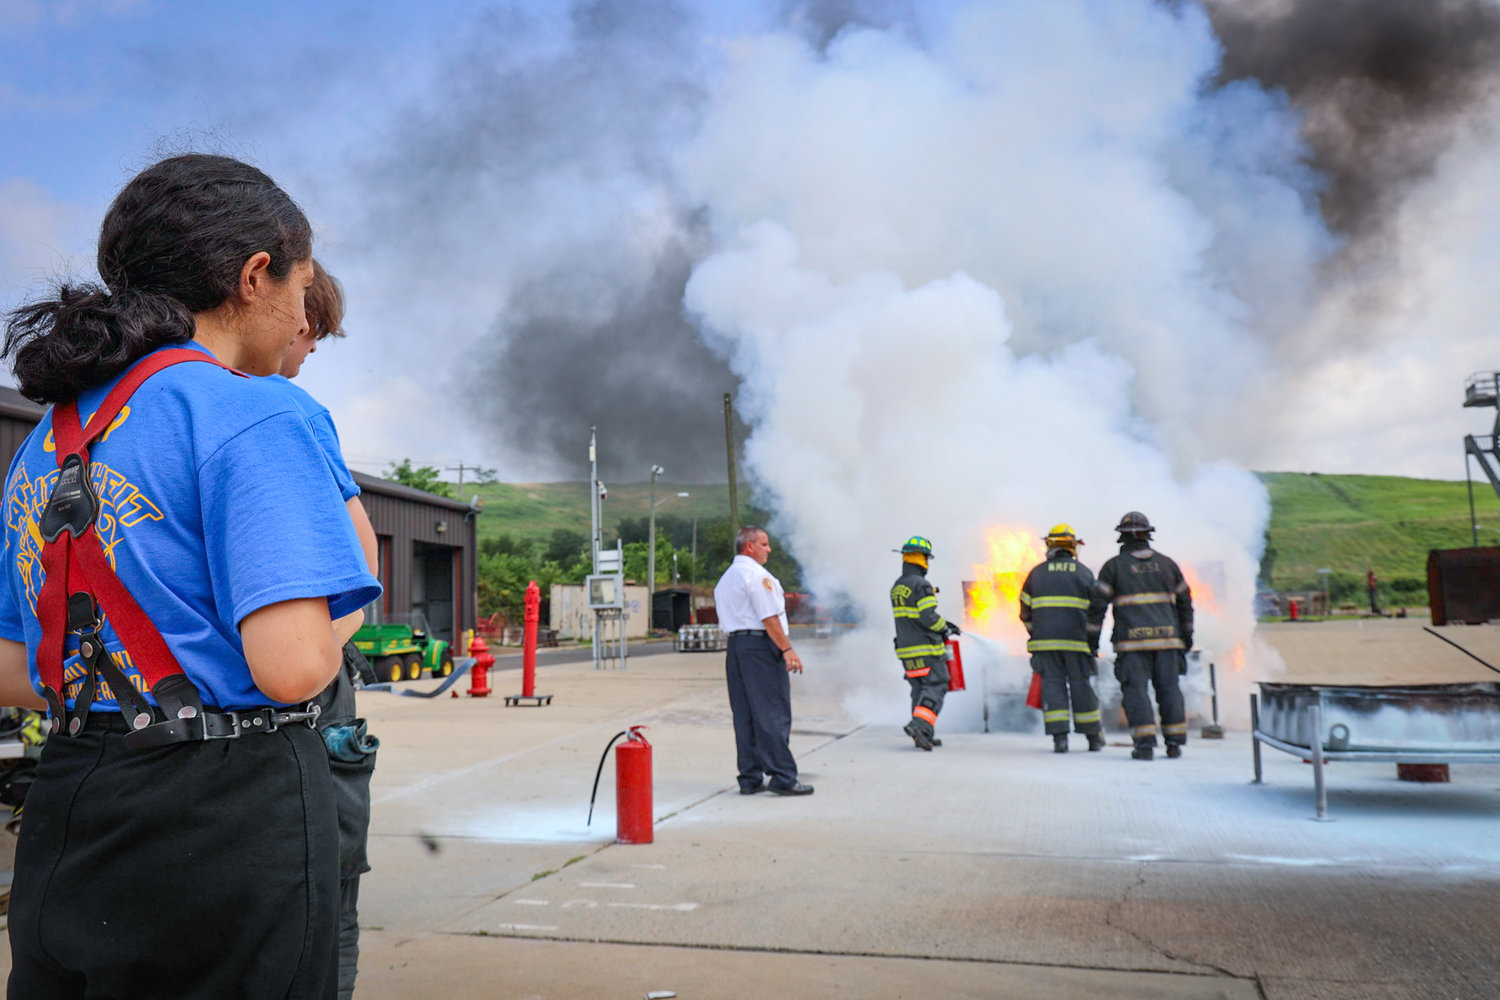 Khadeegah Memon, 14, of East Norwich is watching firefighters demonstrate extinguishing techniques at the Nassau County Fire Service Academy in Bethpage.